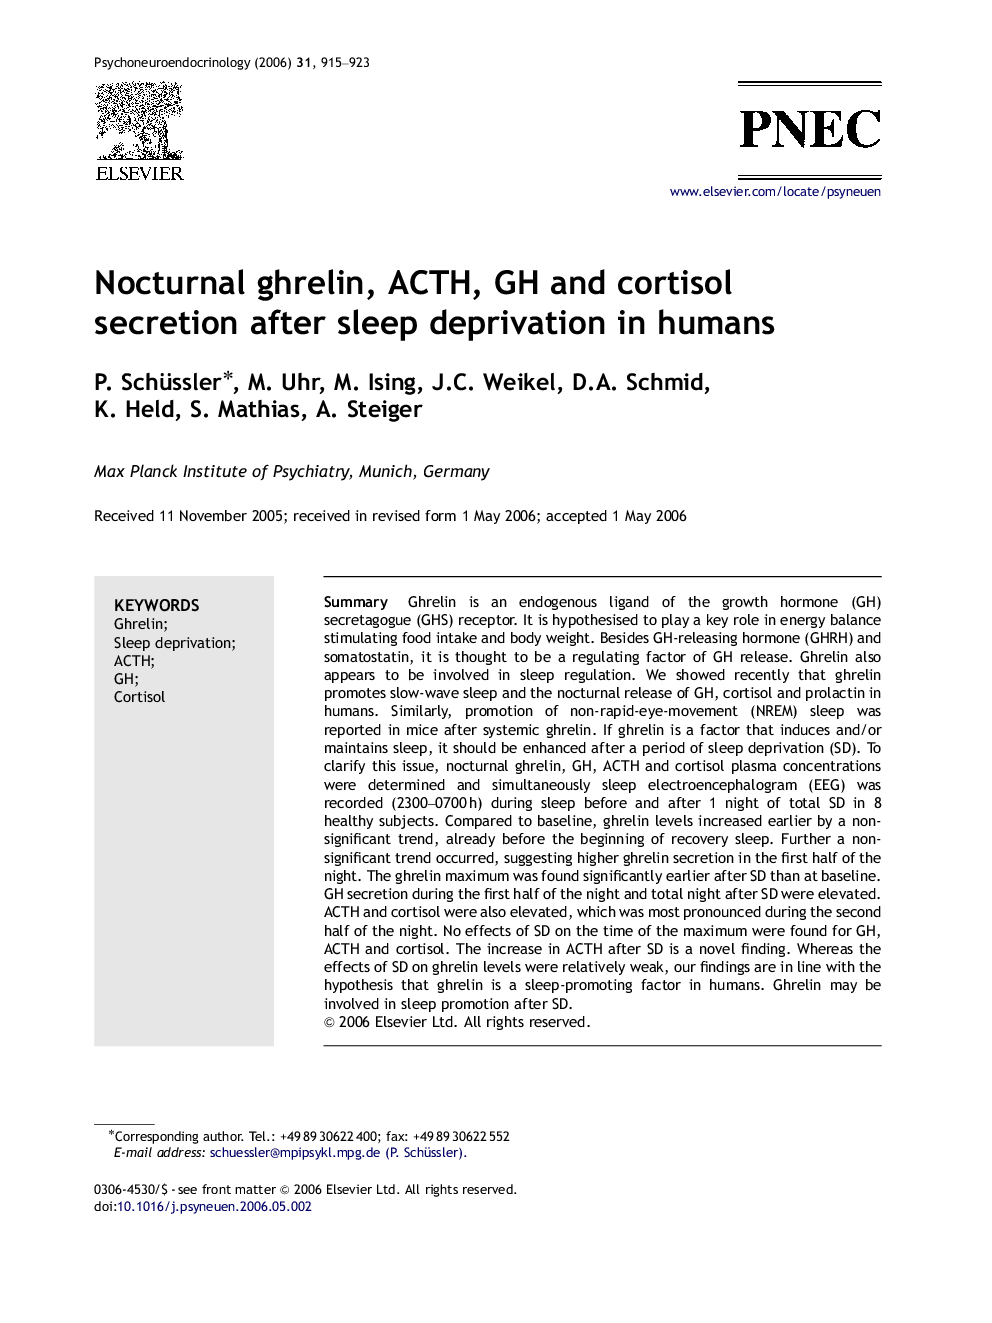 Nocturnal ghrelin, ACTH, GH and cortisol secretion after sleep deprivation in humans